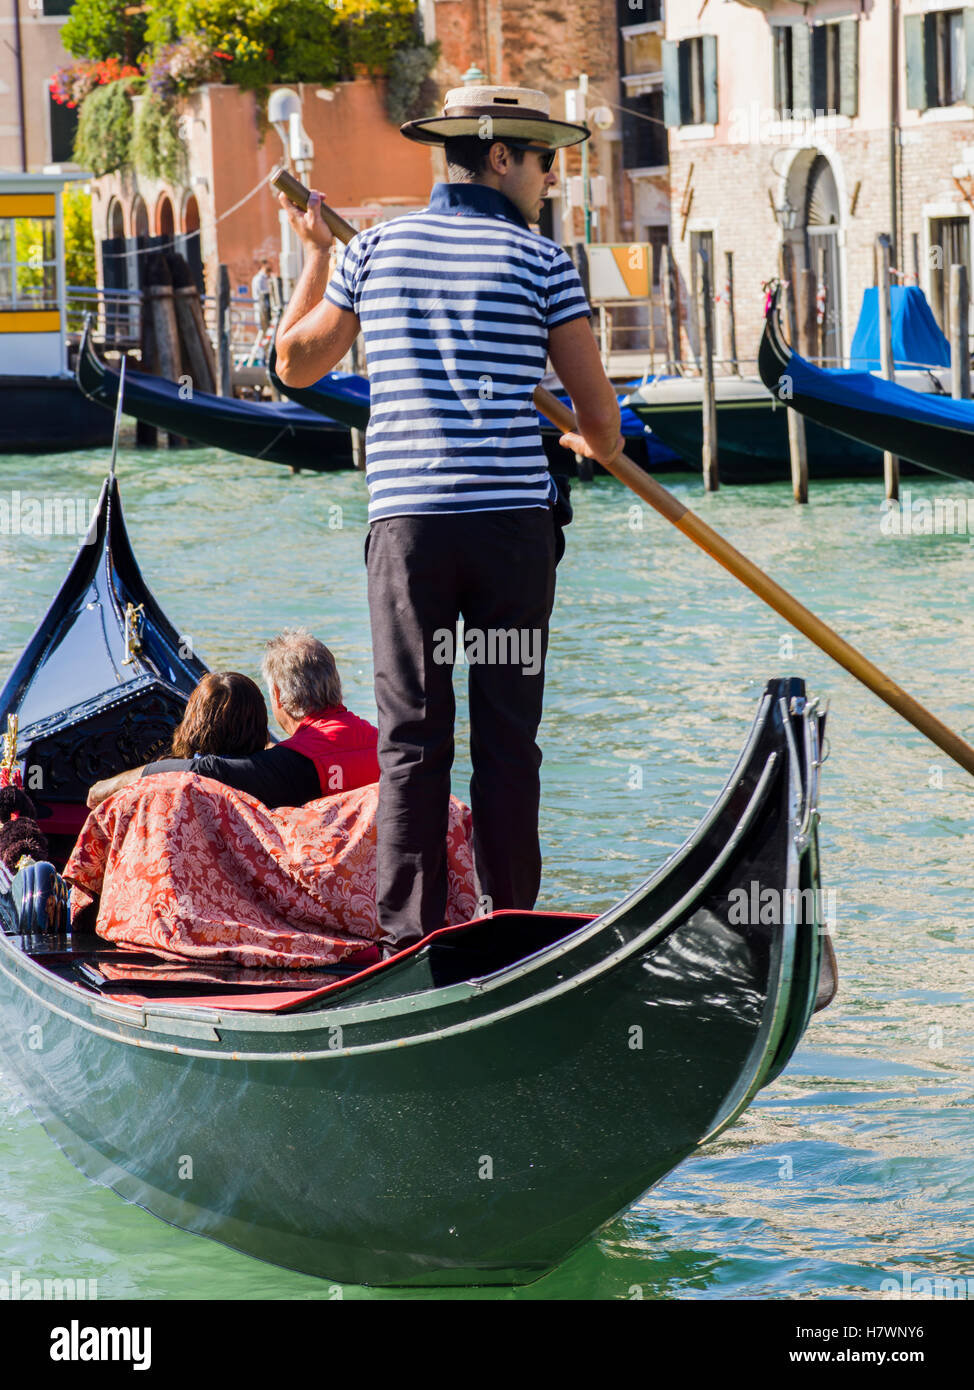 Gondola in a canal with gondolier in a striped shirt; Venice, Italy Stock  Photo - Alamy